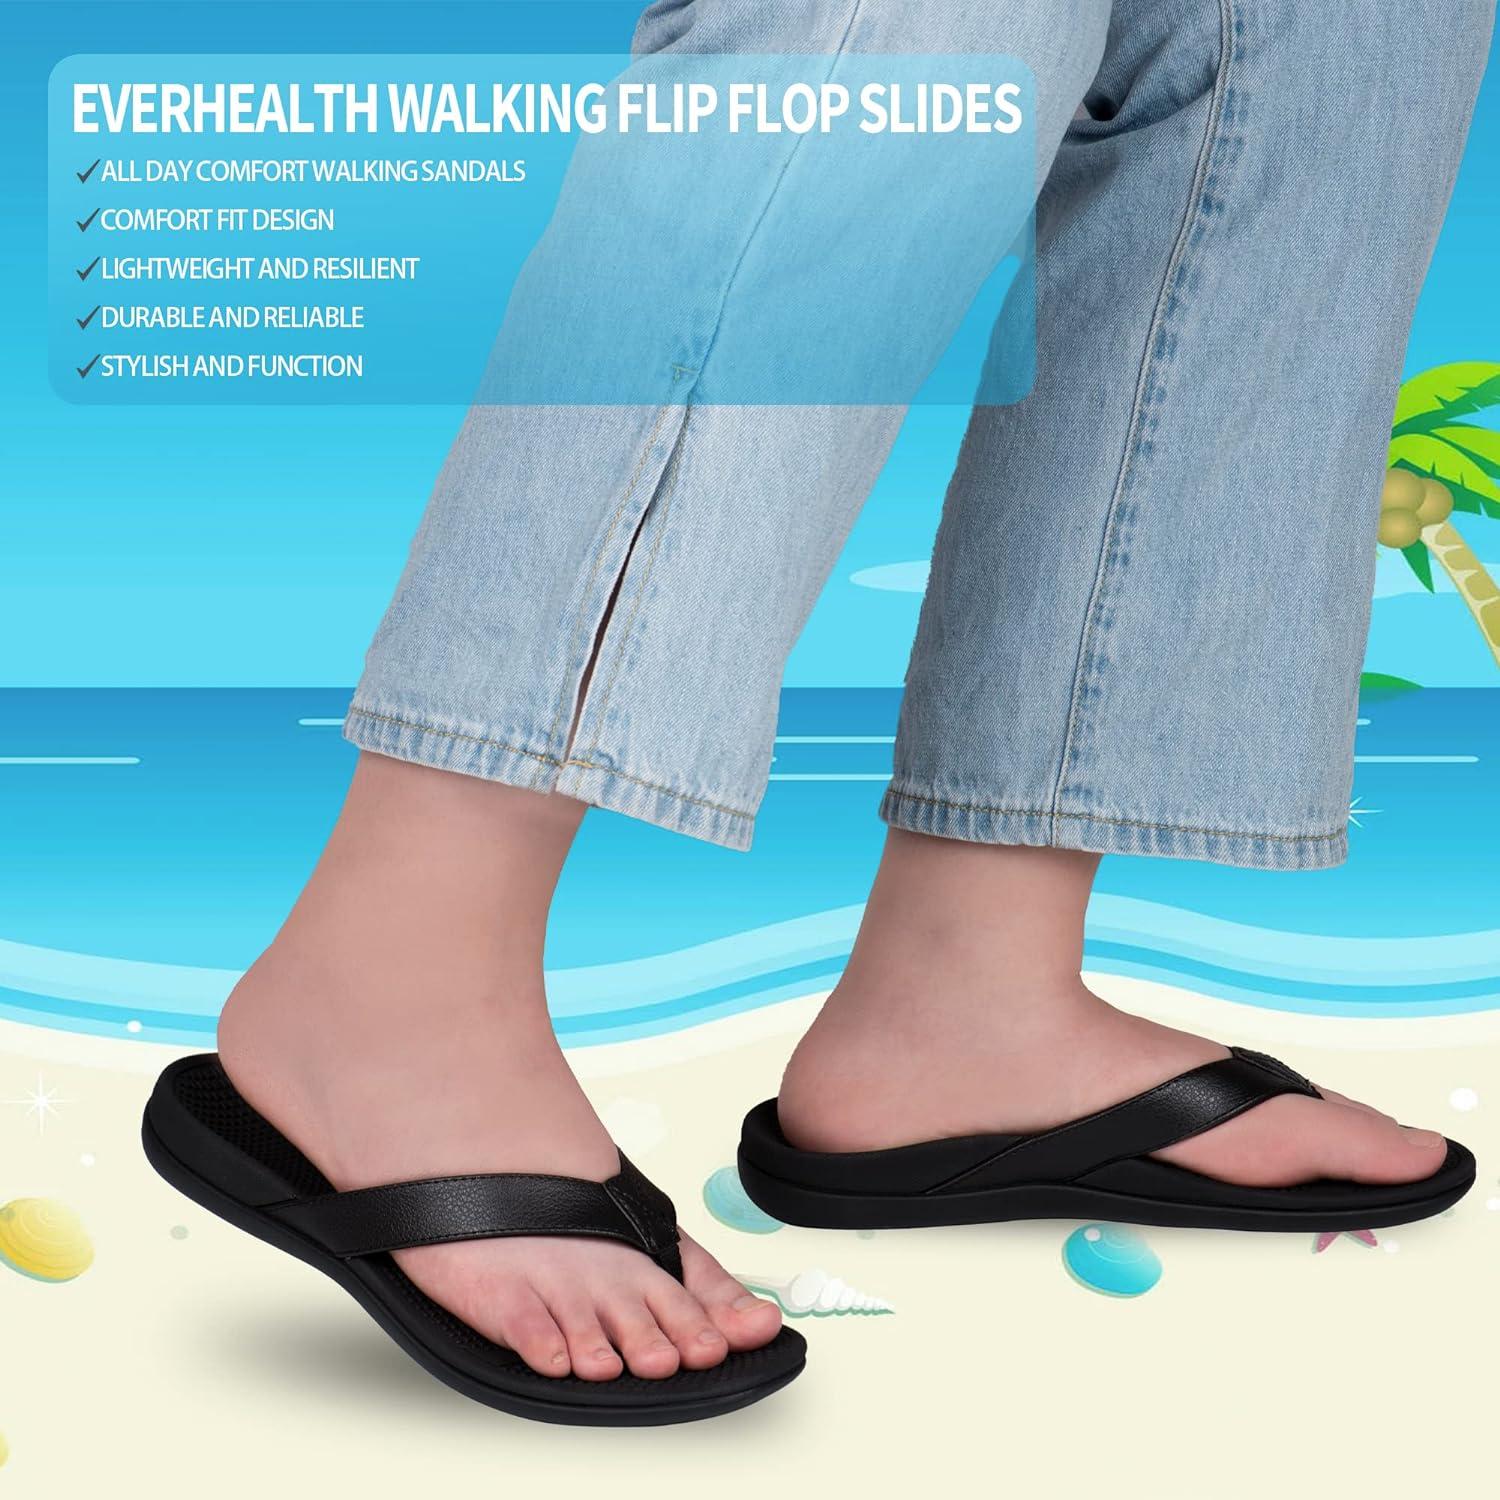 Everhealth Women's Orthotic Flip Flops Arch Support Sandals